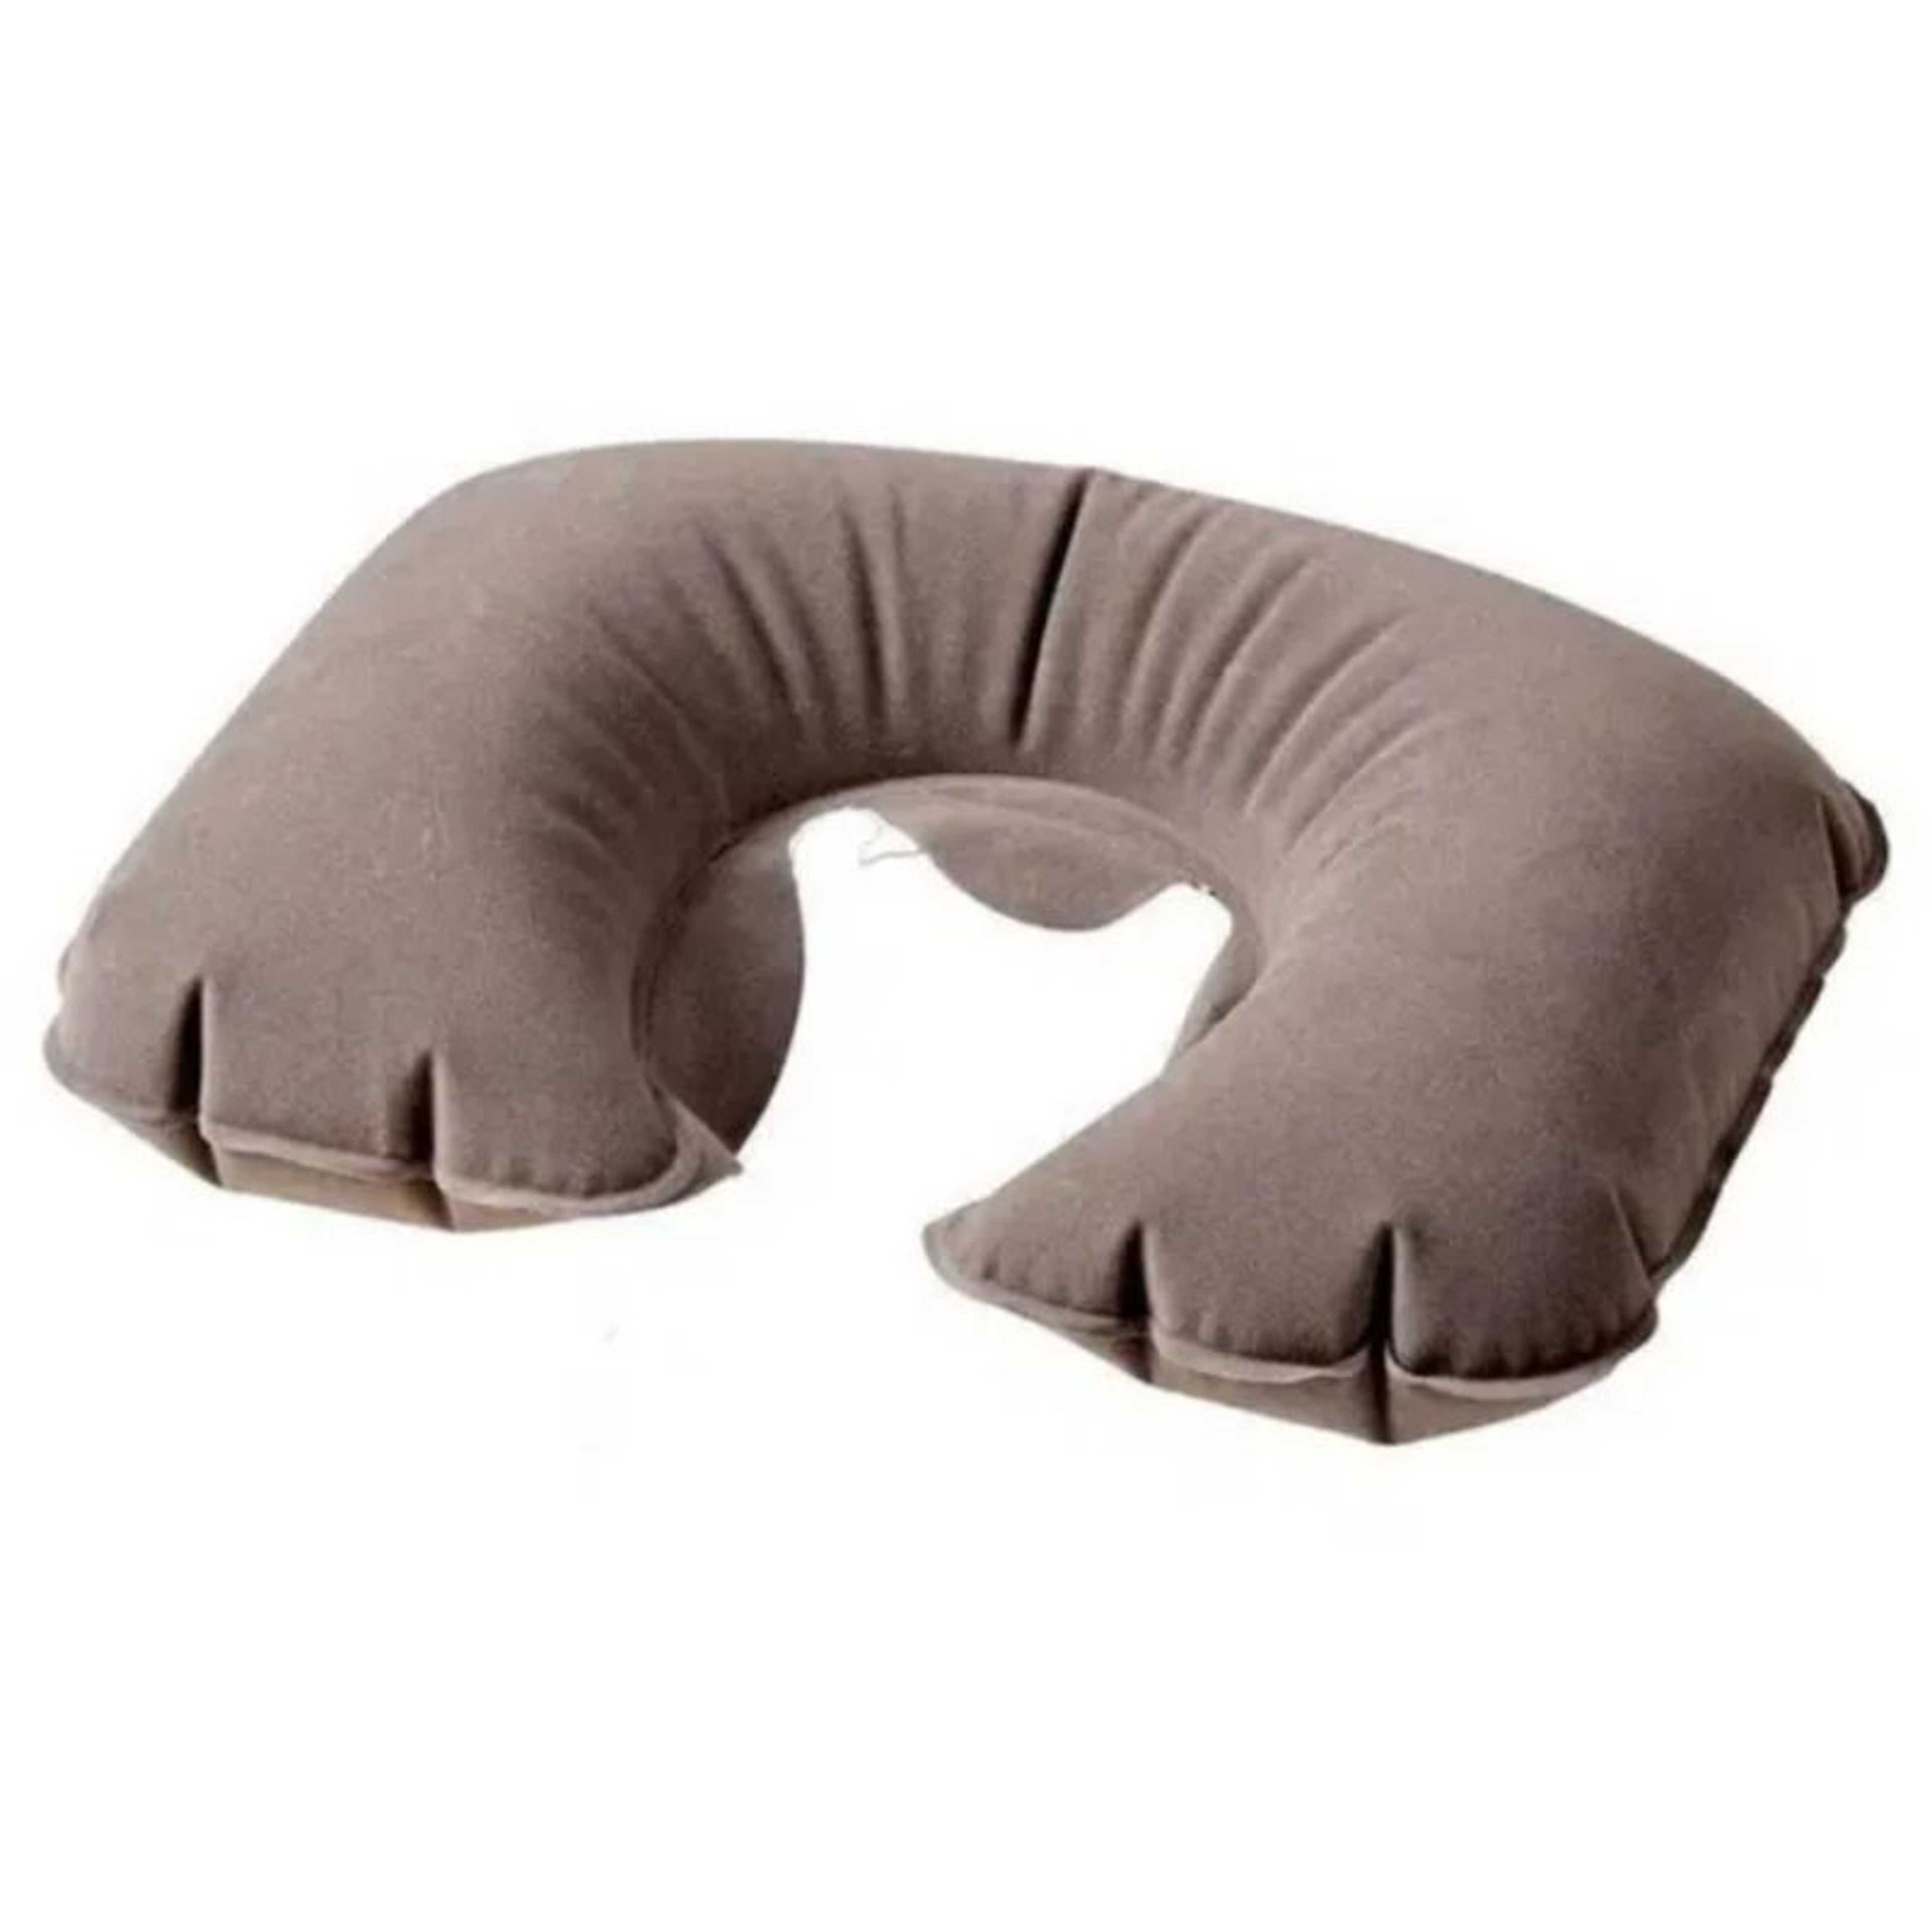 Relax Comfortable Car Air Neck Pillow For Travel